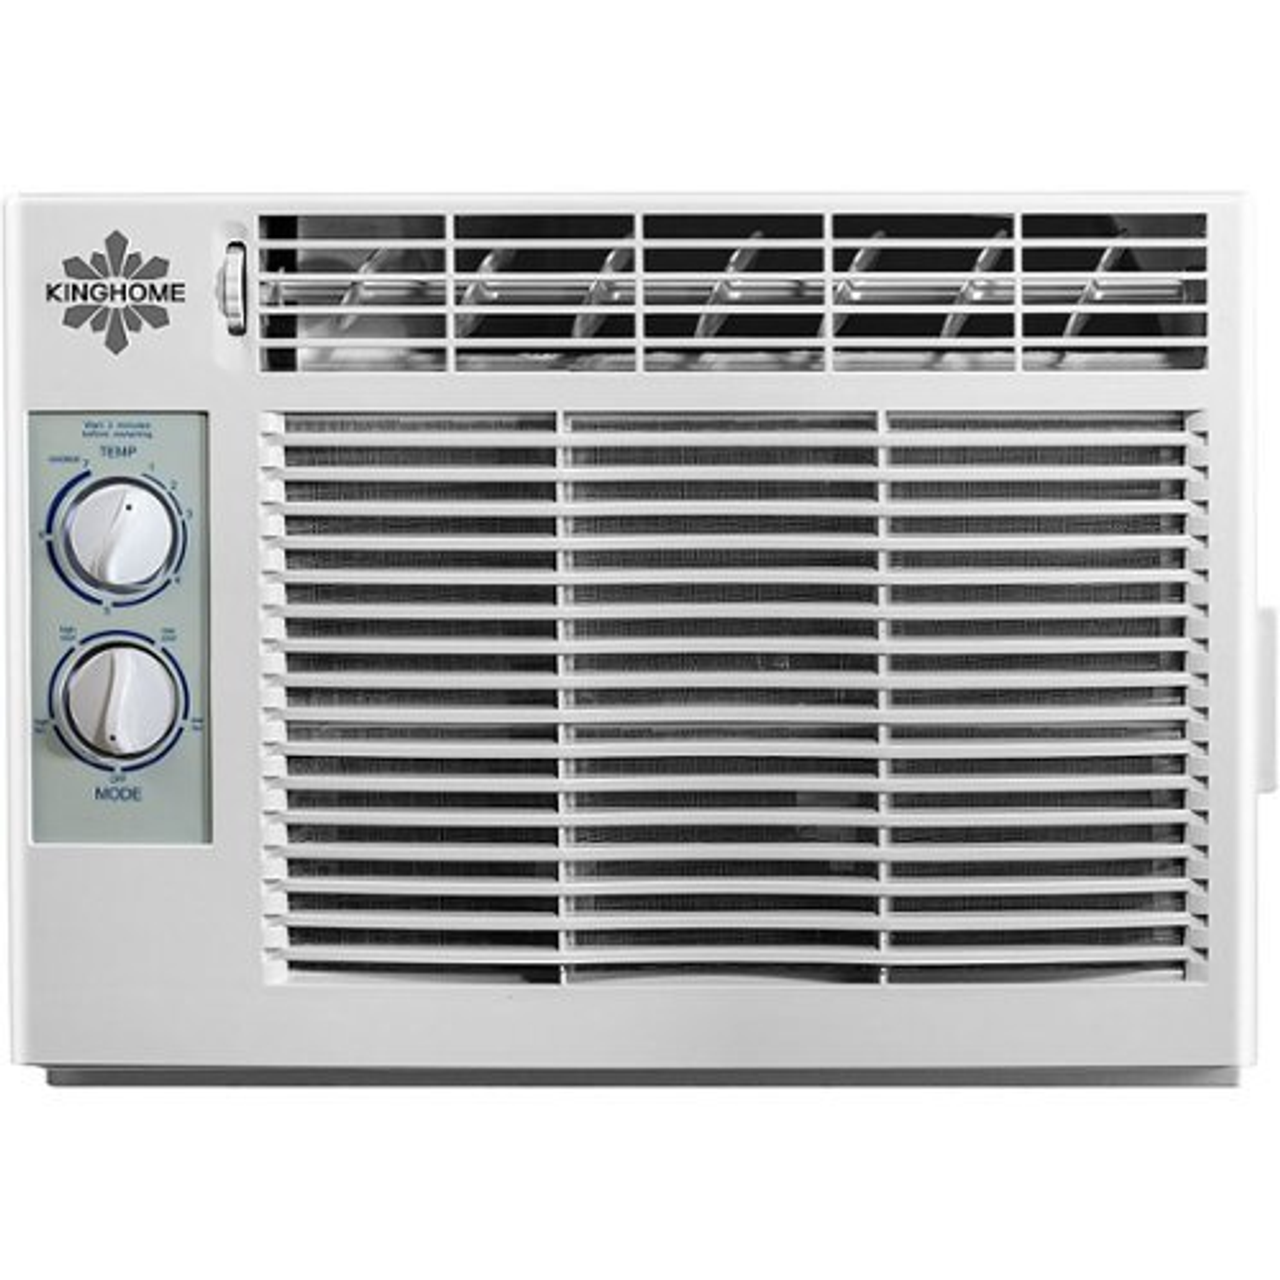 KingHome - 5,000 BTU Window Air Conditioner with Mechanical Controls - White